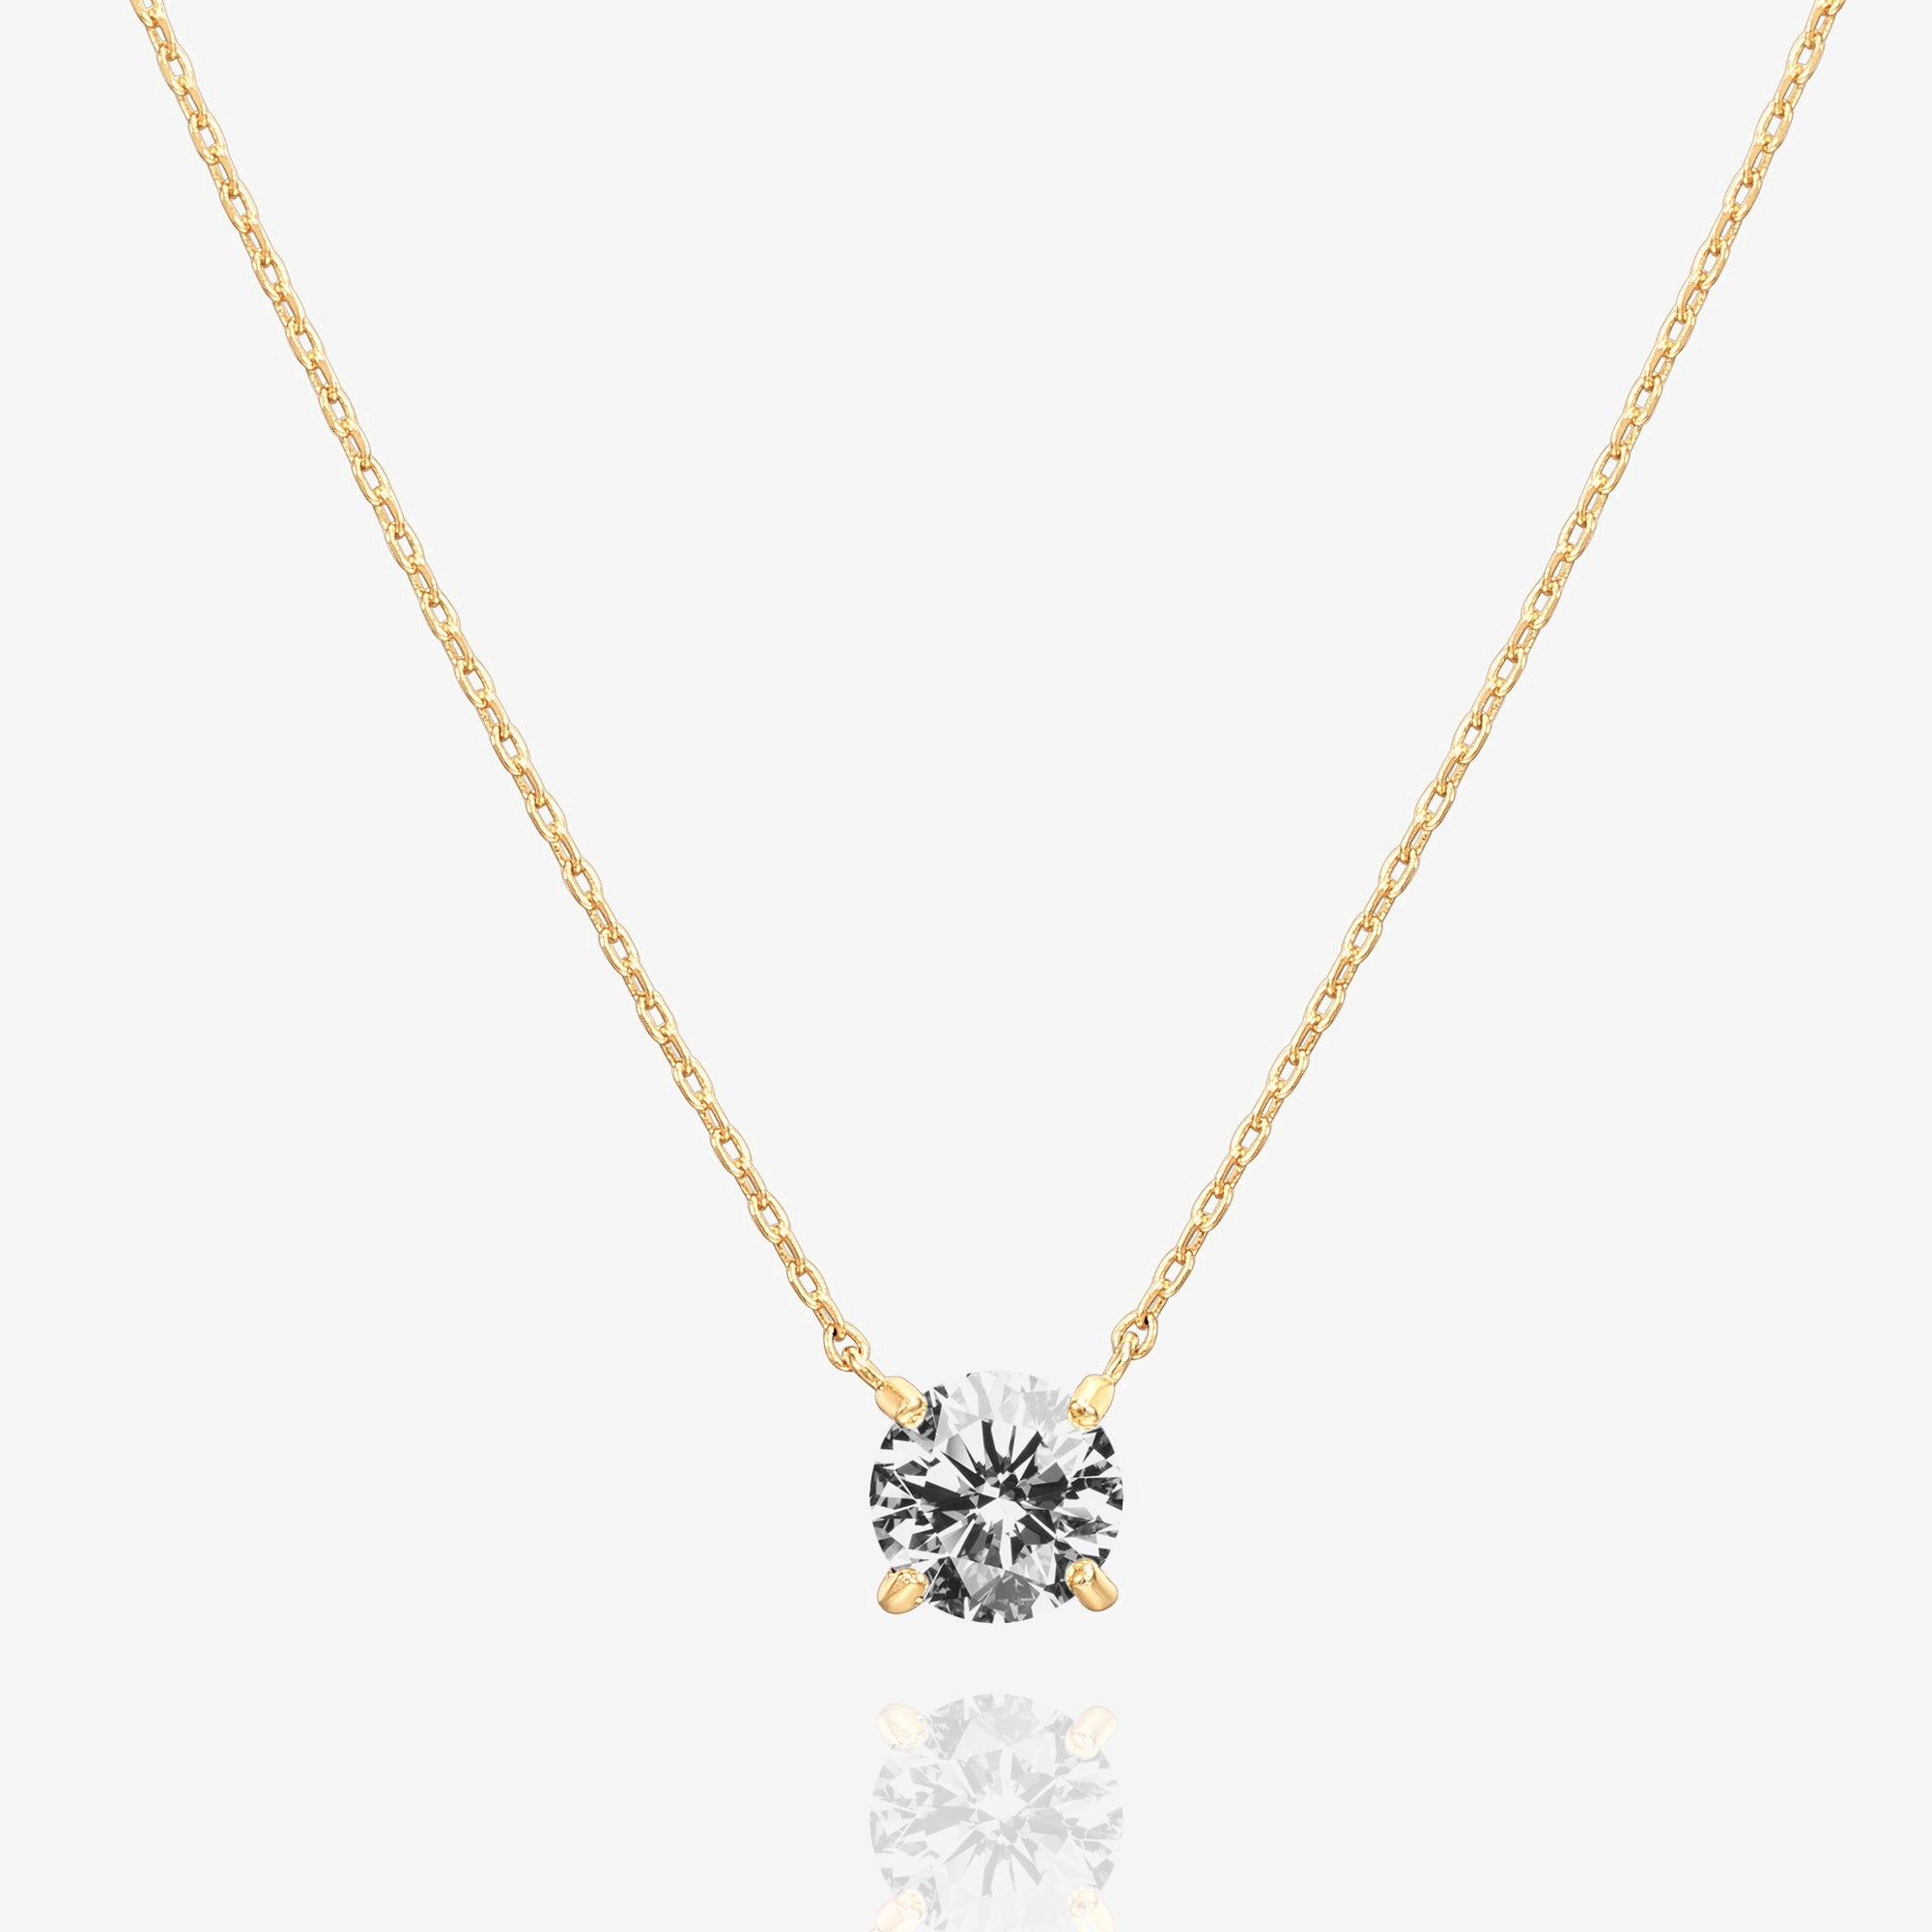 Shop 14K Gold Plated Solitaire Necklaces at PAVOI